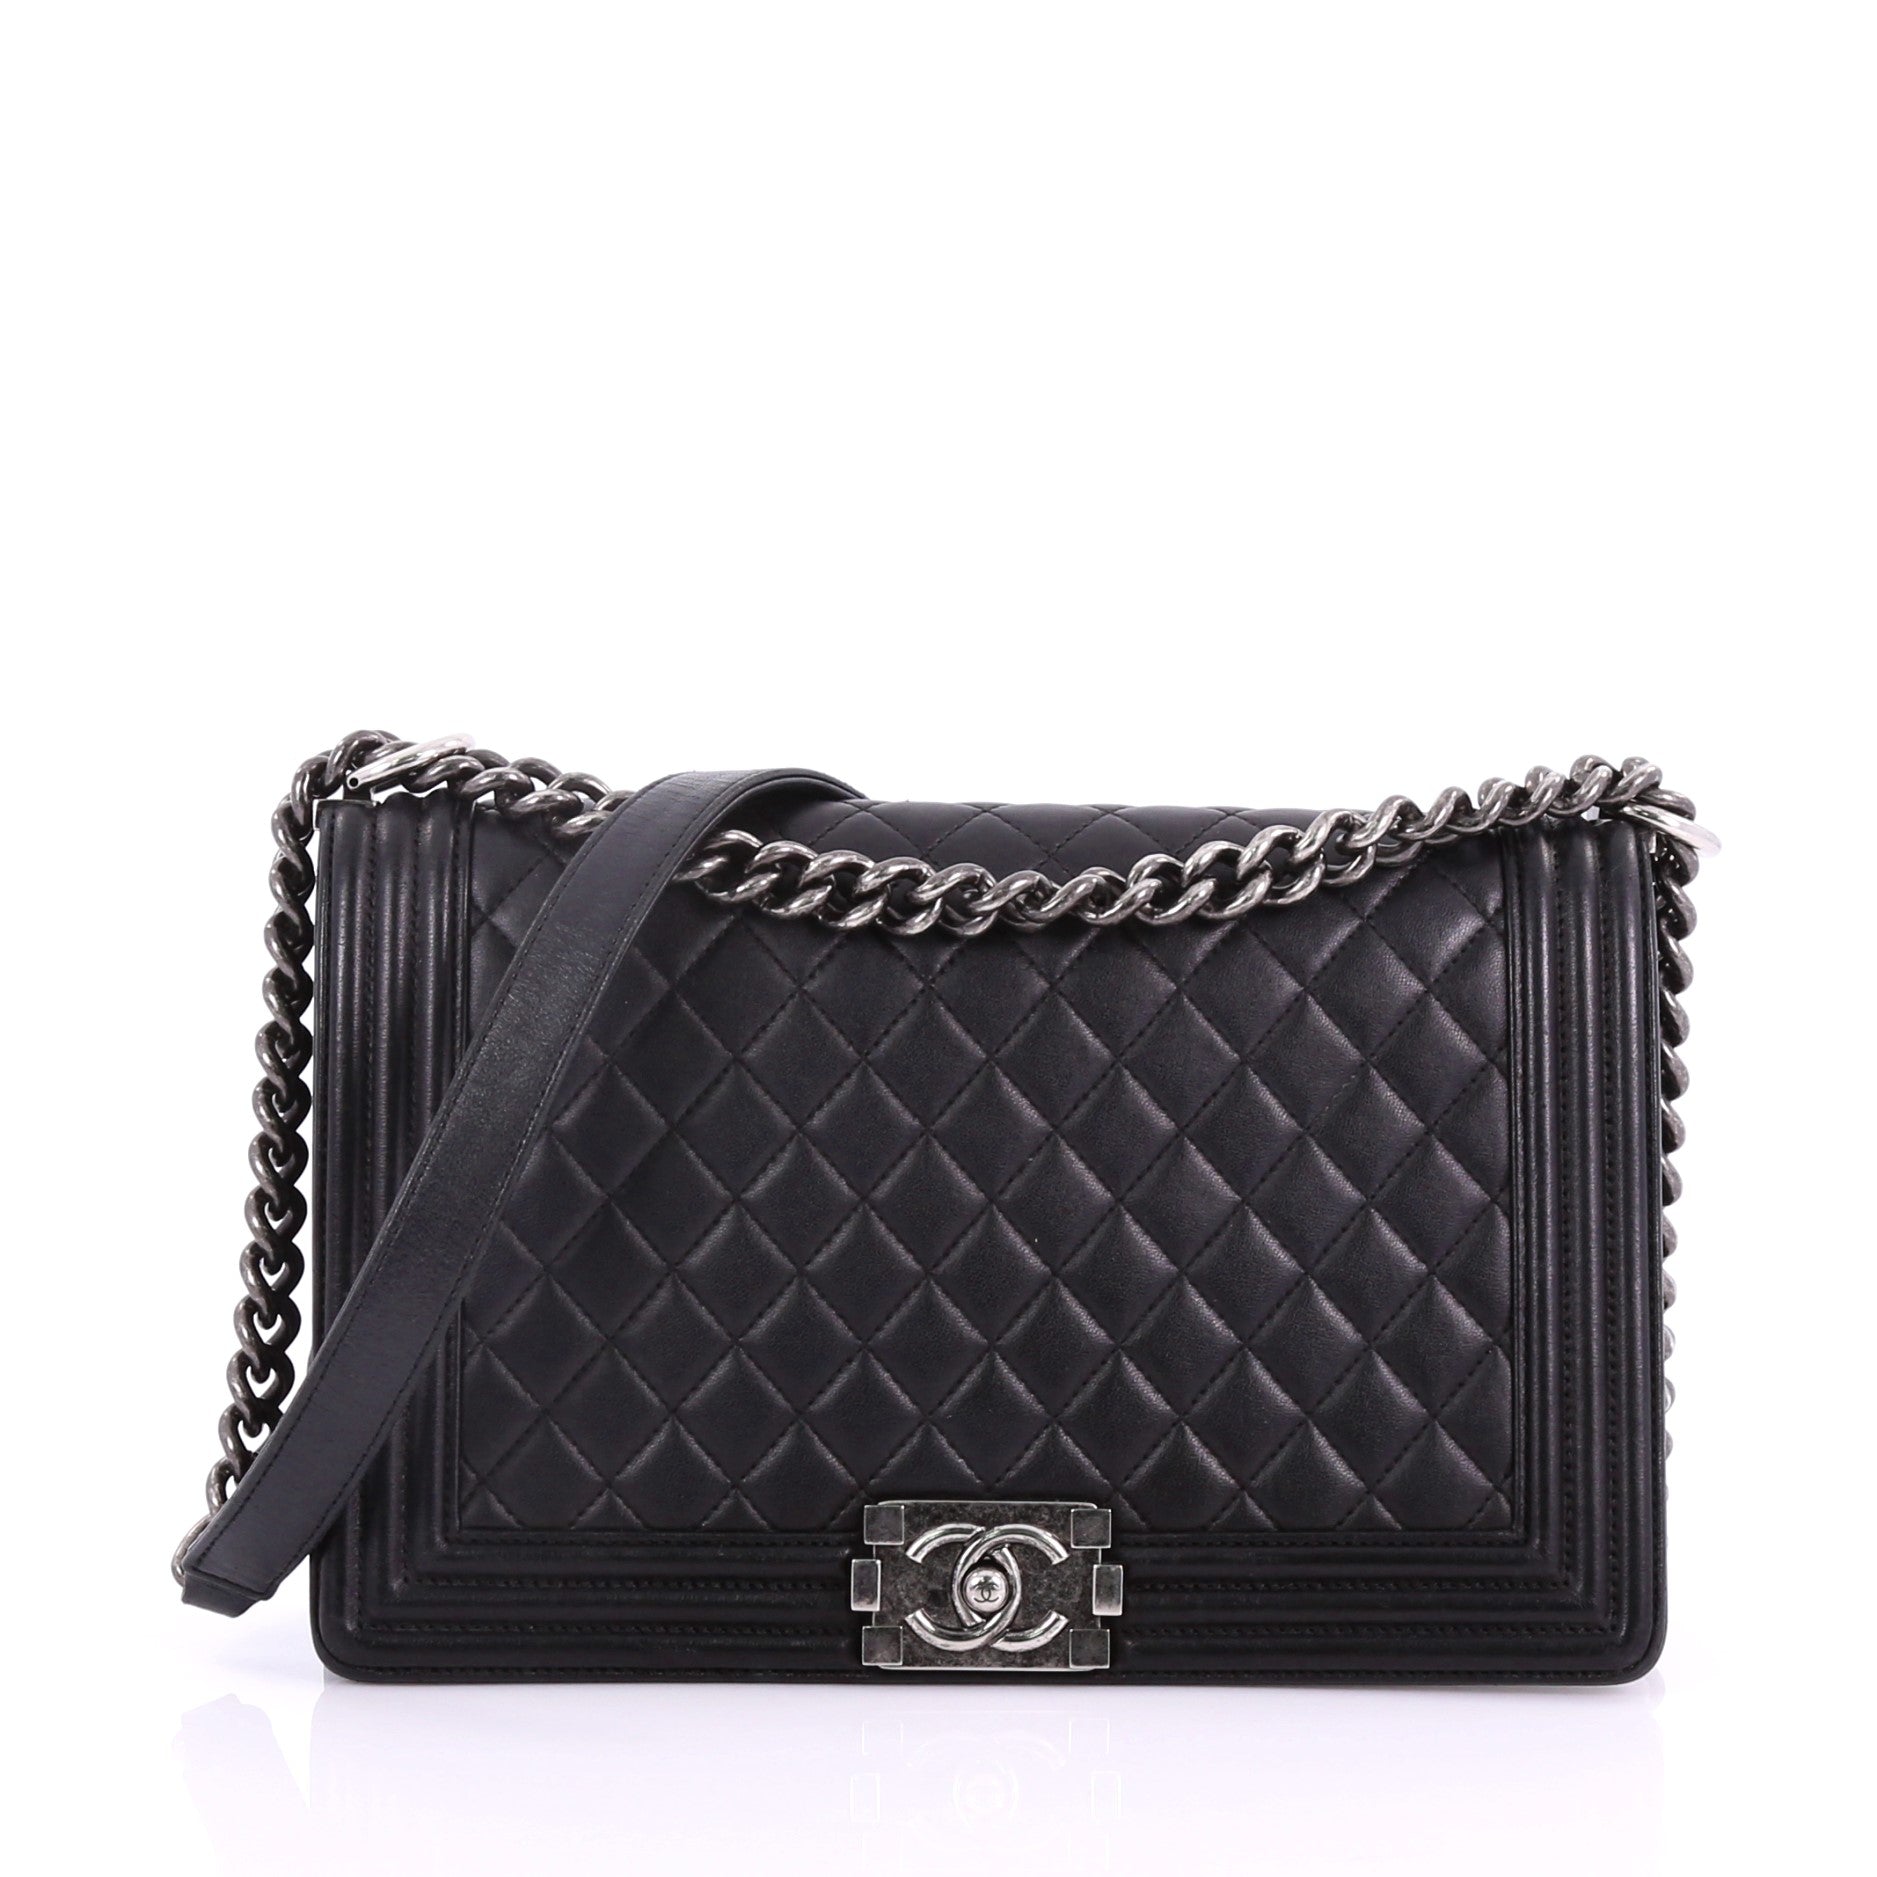 37117-15_Chanel_Boy_Flap_Bag_Quilted_Lambskin_New_2D_0002.jpg?v=1575949960